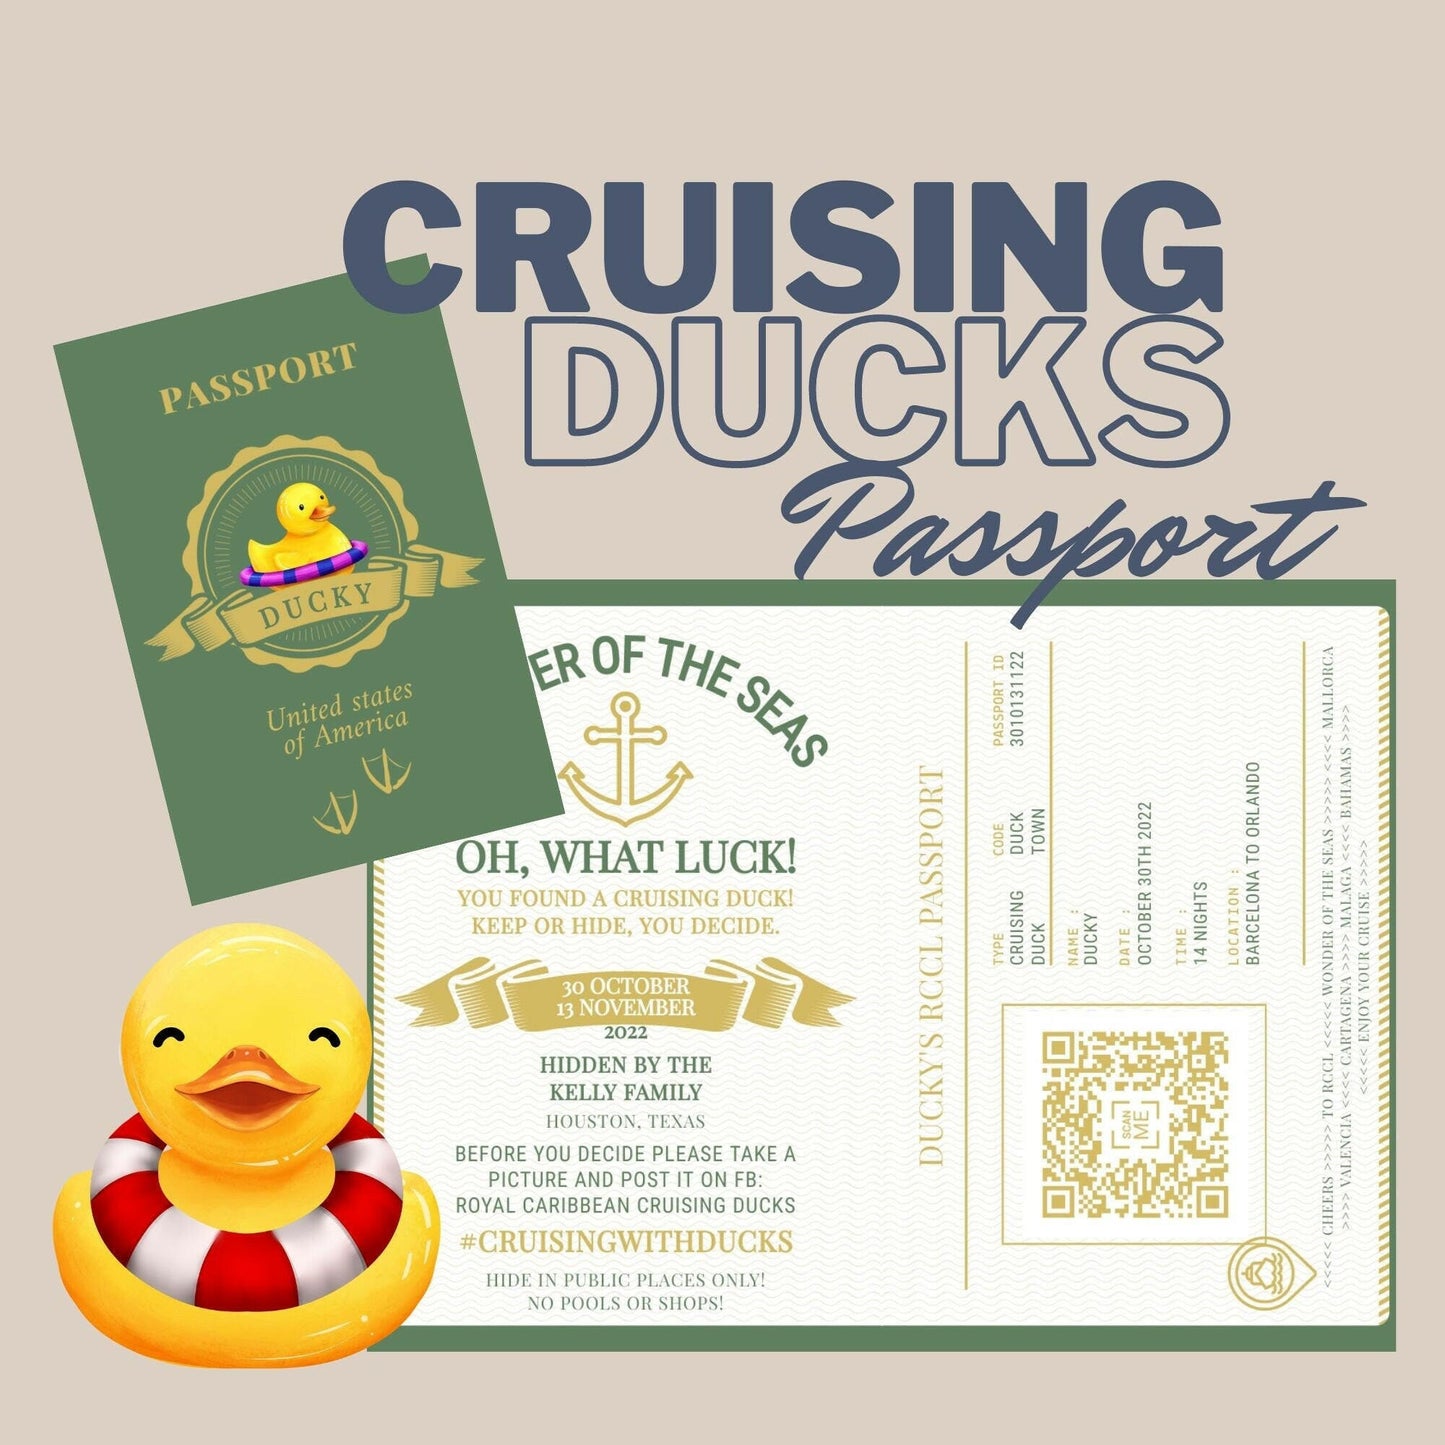 Passport to Adventure: Explore the World with Your Cruising Rubber Ducks